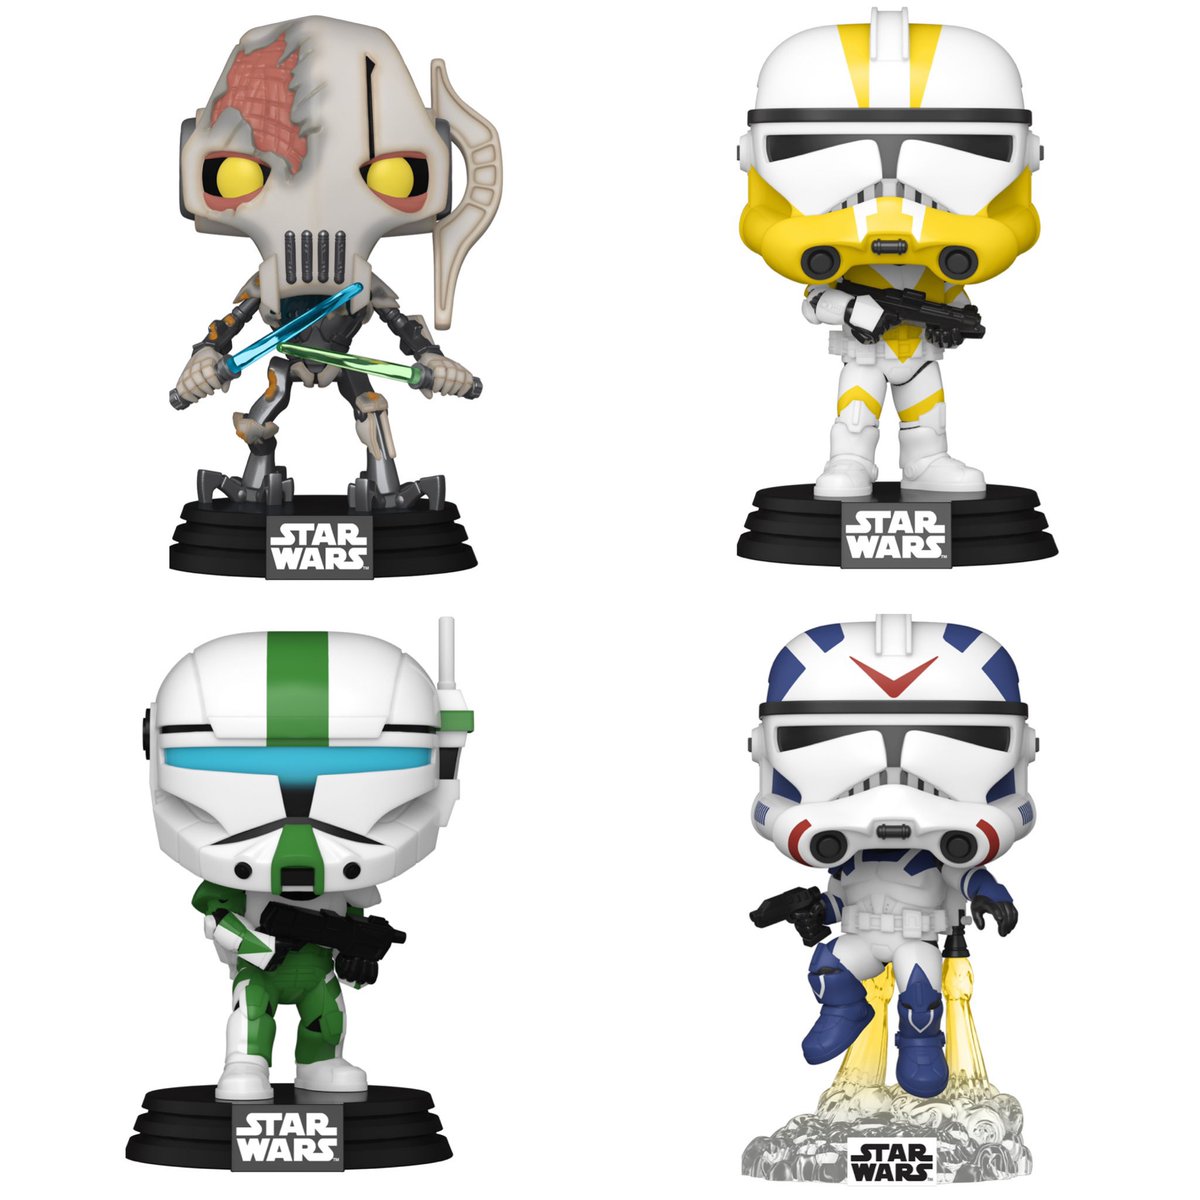 Updated glams for the new Star Wars Gaming Greats Funko POPs! Exclusive to GameStop and available below ~ thanks @funkoinfo_ ~
Linky ~ bit.ly/3LXFH4G
#Ad #StarWars #Battlefront #FallenOrder #FPN #FunkoPOPNews #Funko #POP #POPVinyl #FunkoPOP #FunkoSoda